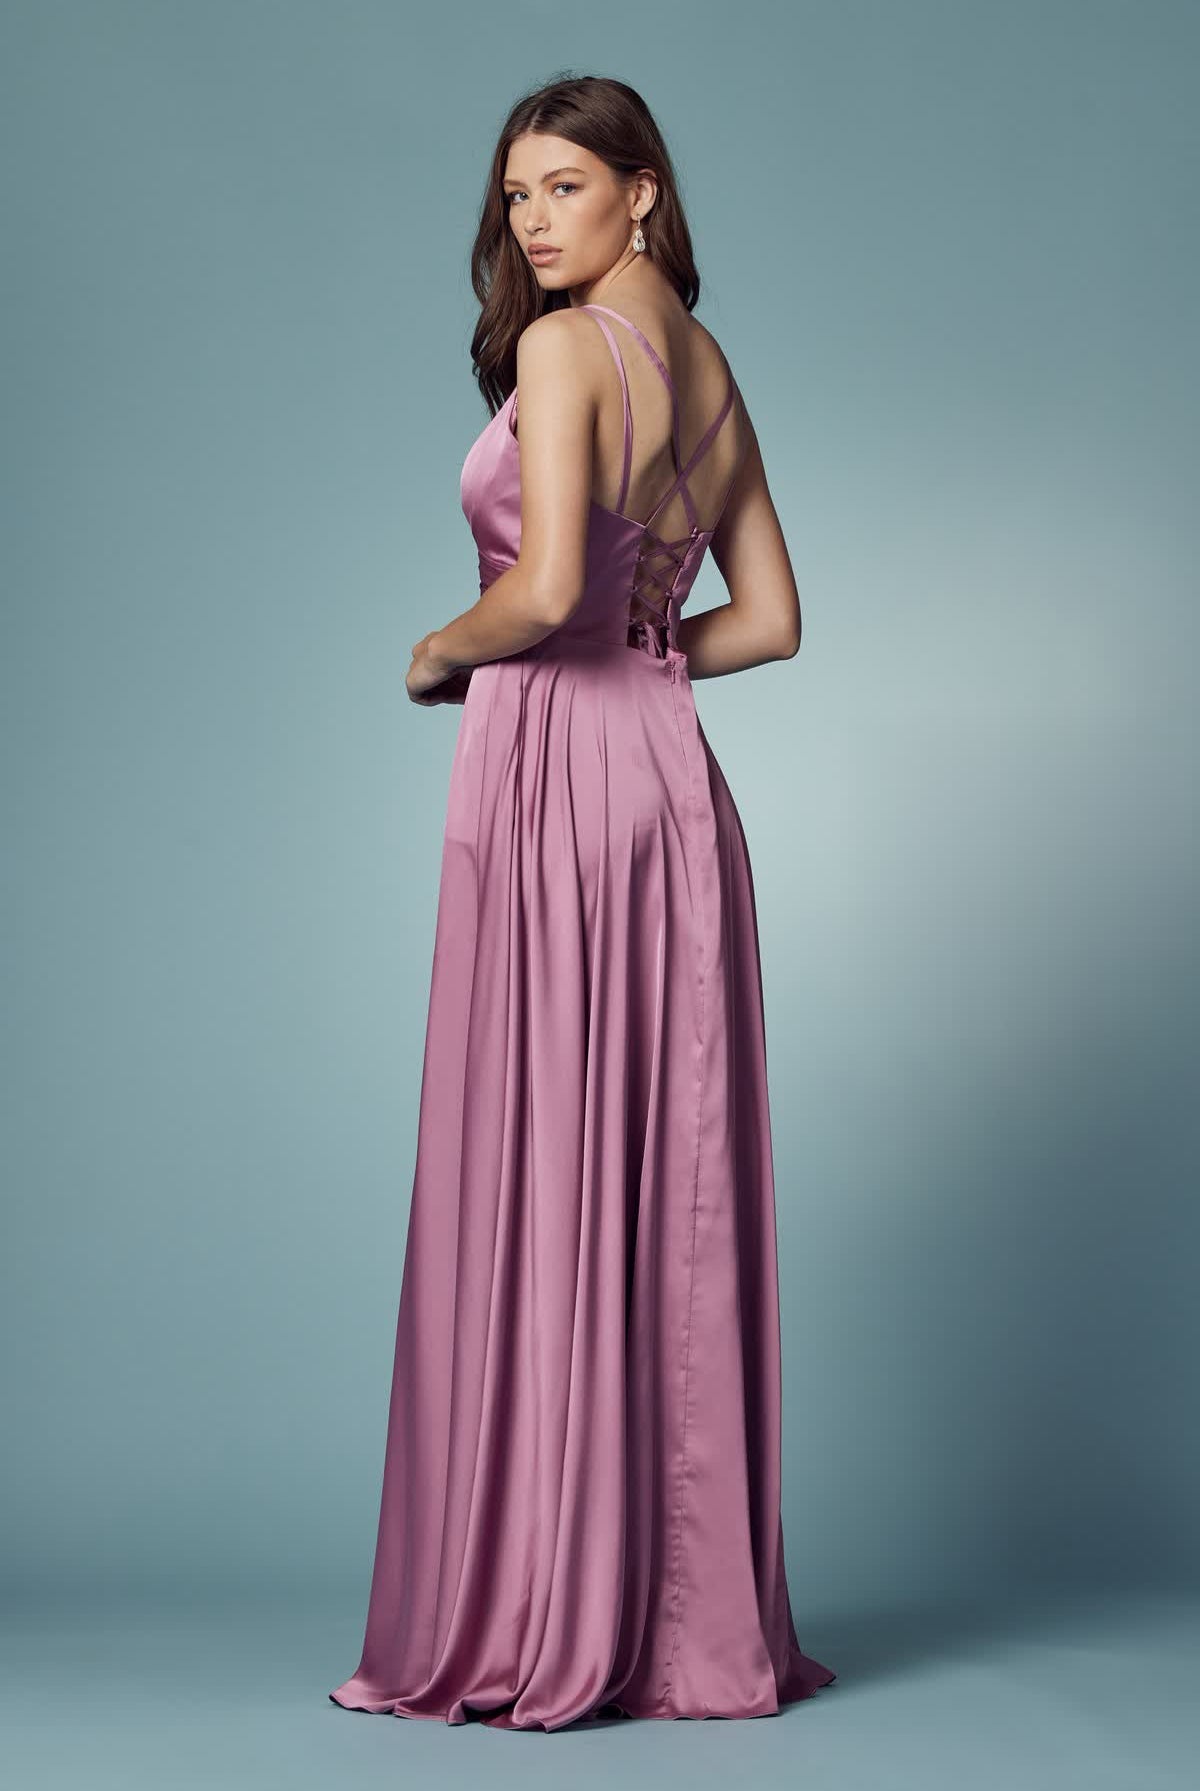 Double Breasted High Slit Long Bridesmaid & Prom Dress NXE1020-Prom Dress-smcfashion.com